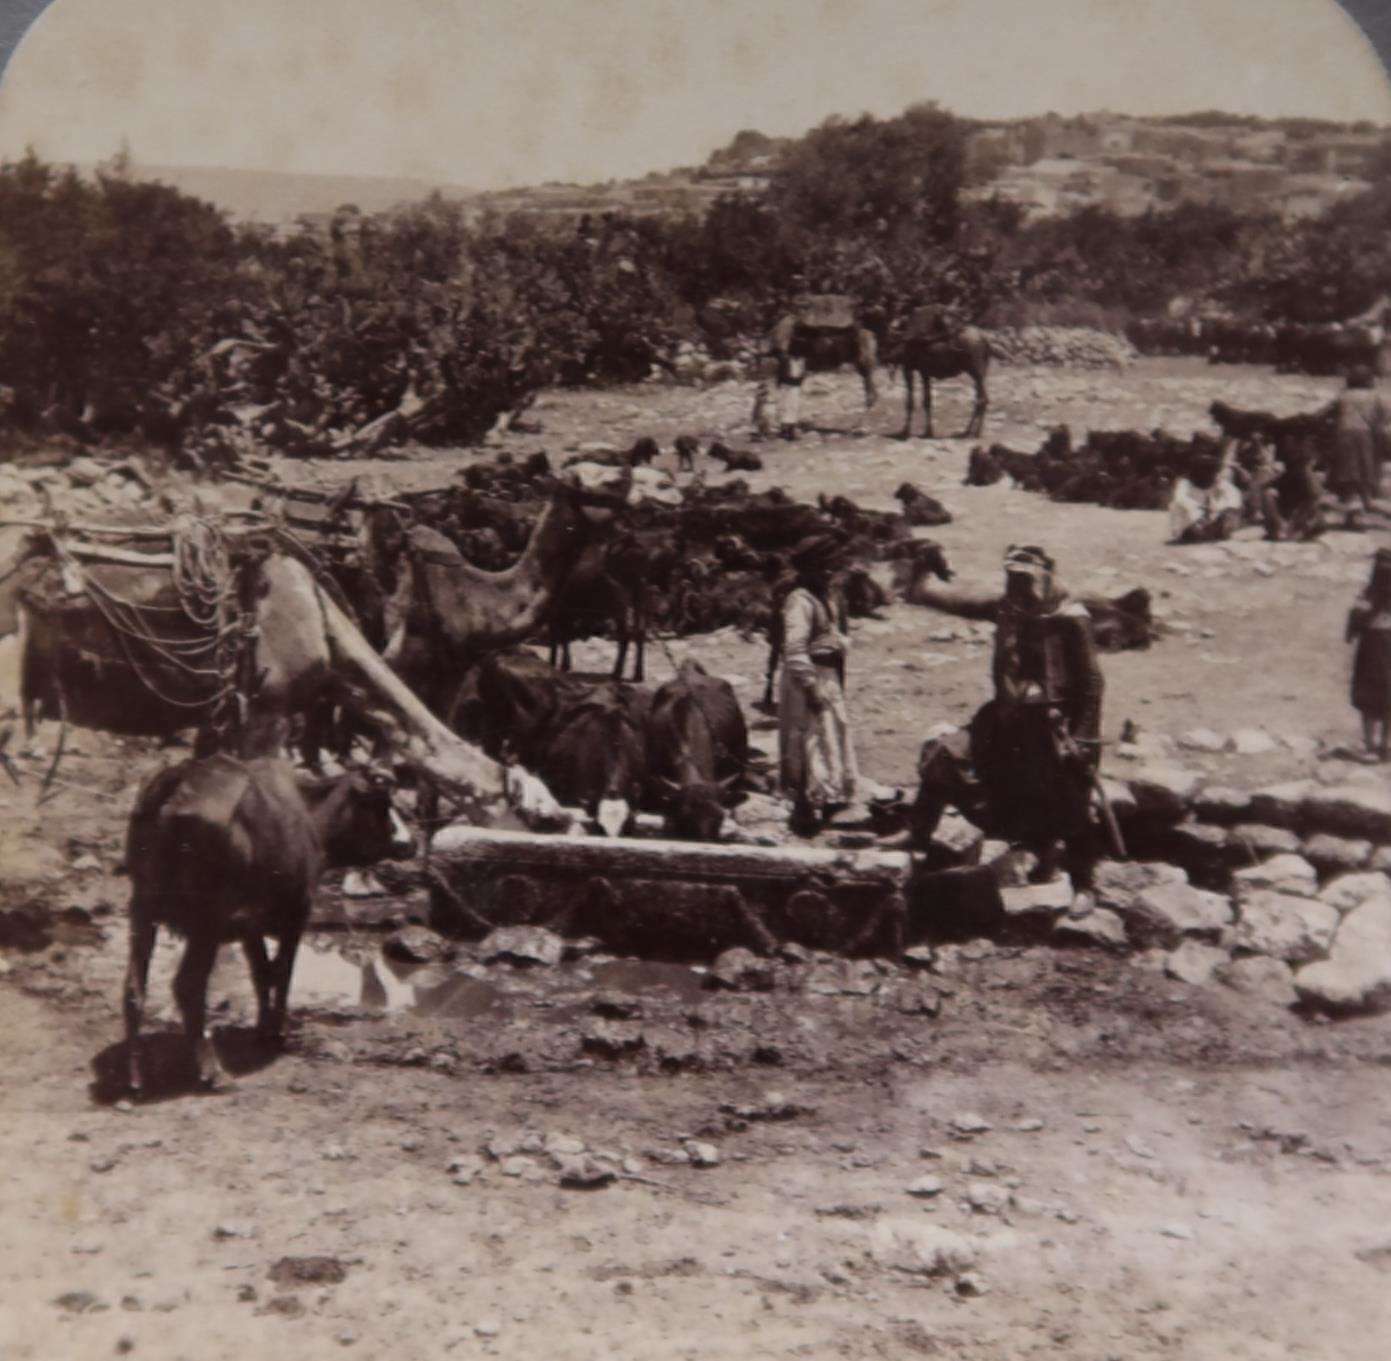 1900 PALESTINE CANA OF GALILEE AND ITS WELL CAMELS CATTLE STEREOVIEW 30-55